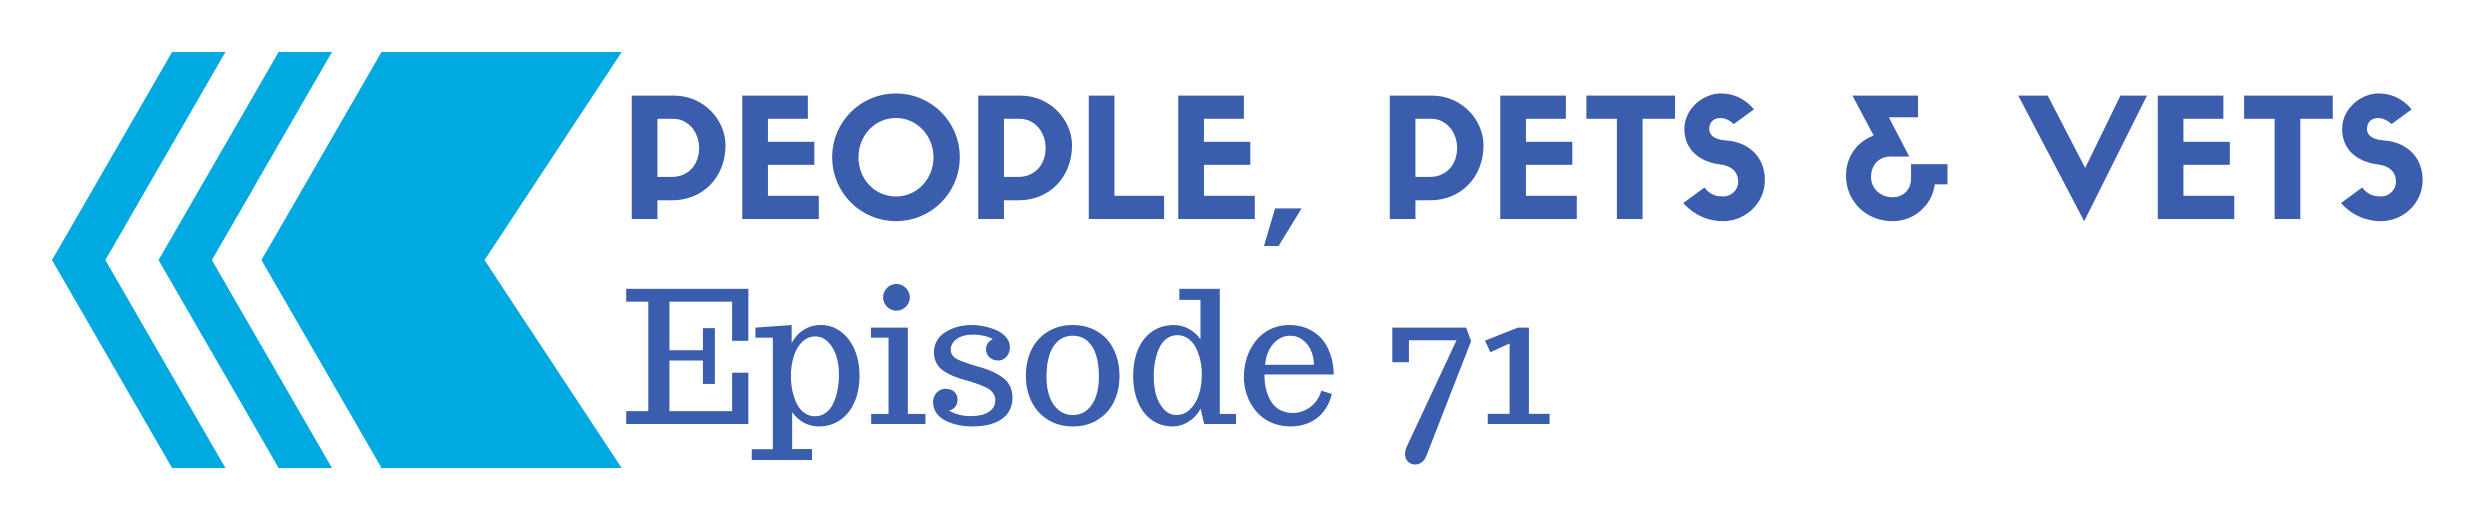 Back to Episode 71